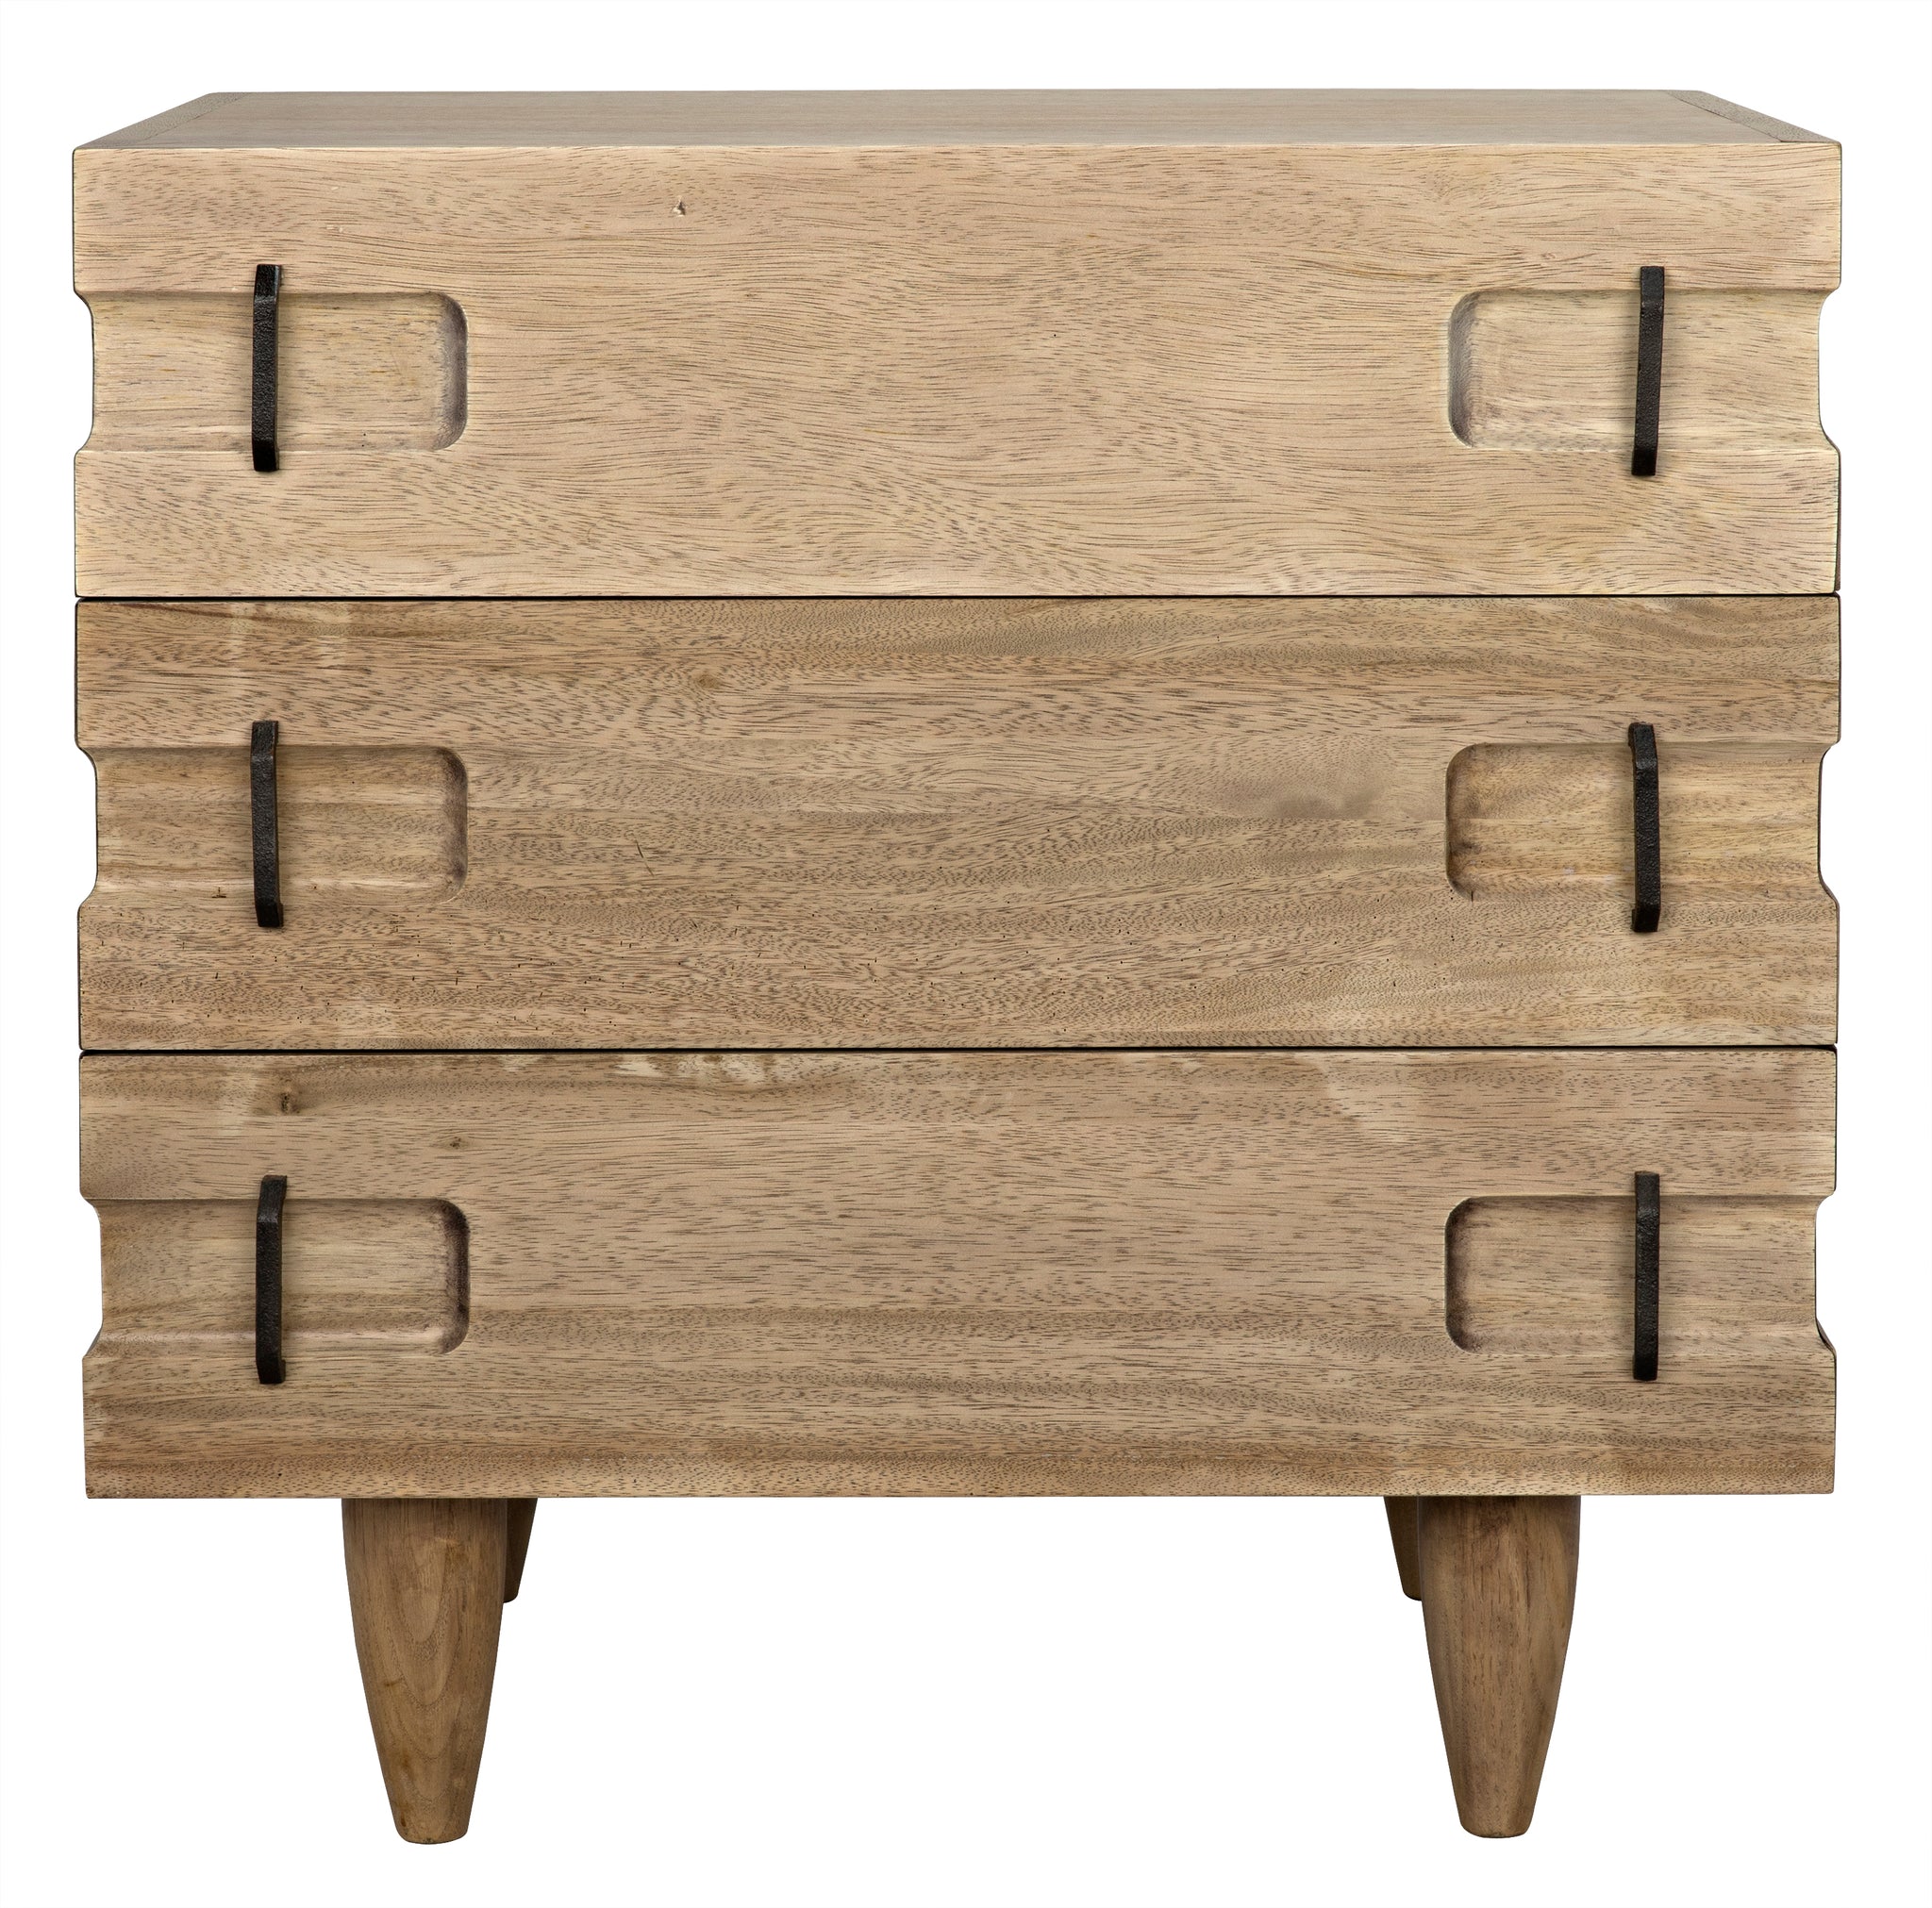 David Side Table - 2 Colors